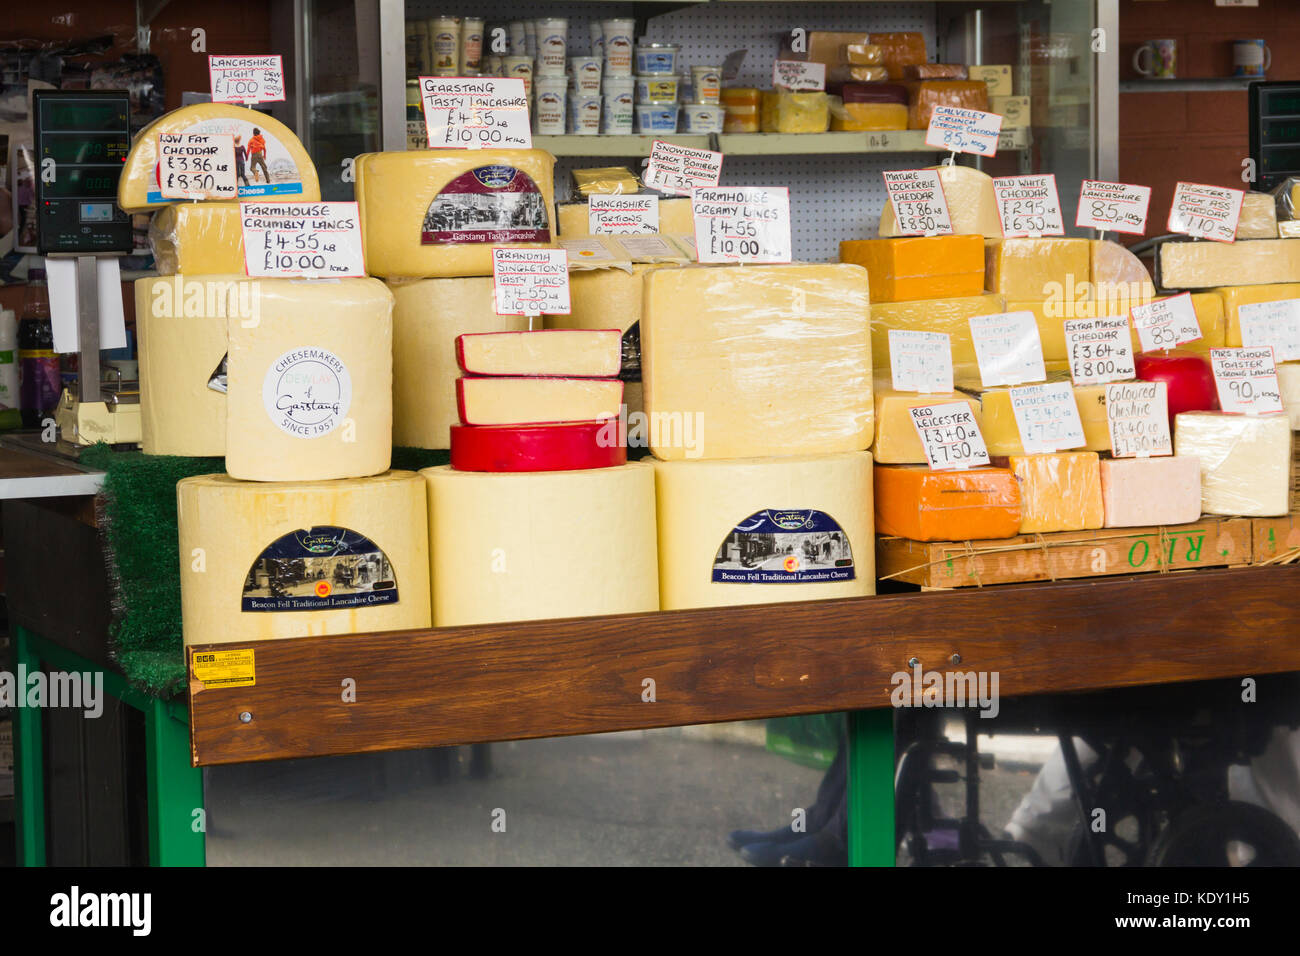 Purdons cheese stall on Bury market. The stall sells a wide range of traditional English cheese specialising in varieties of Lancashire cheese. Stock Photo